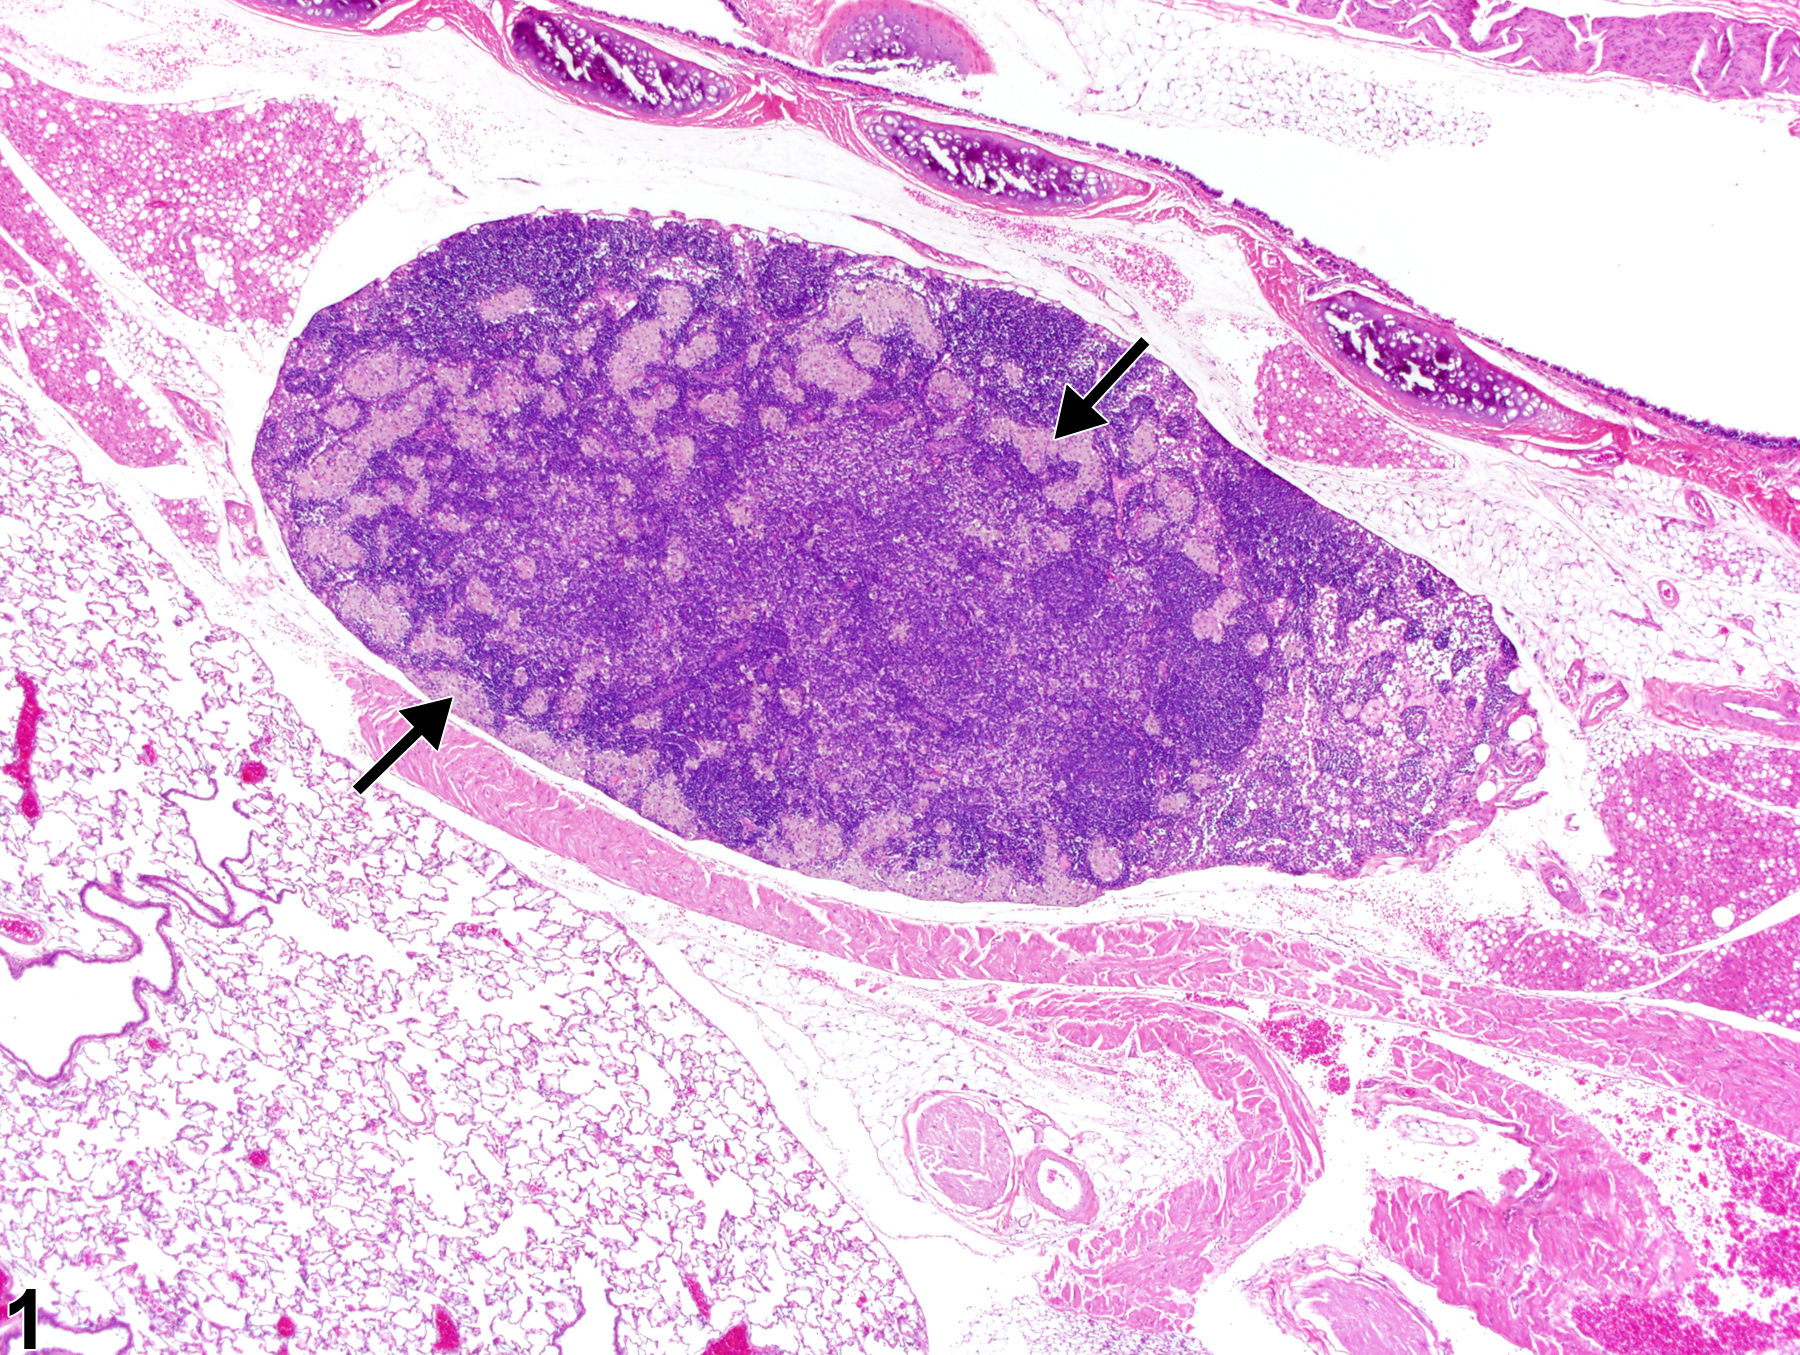 Image of infiltrate, cellular, histiocyte in the lymph node from a male Harlan Sprague-Dawley rat in a subchronic study